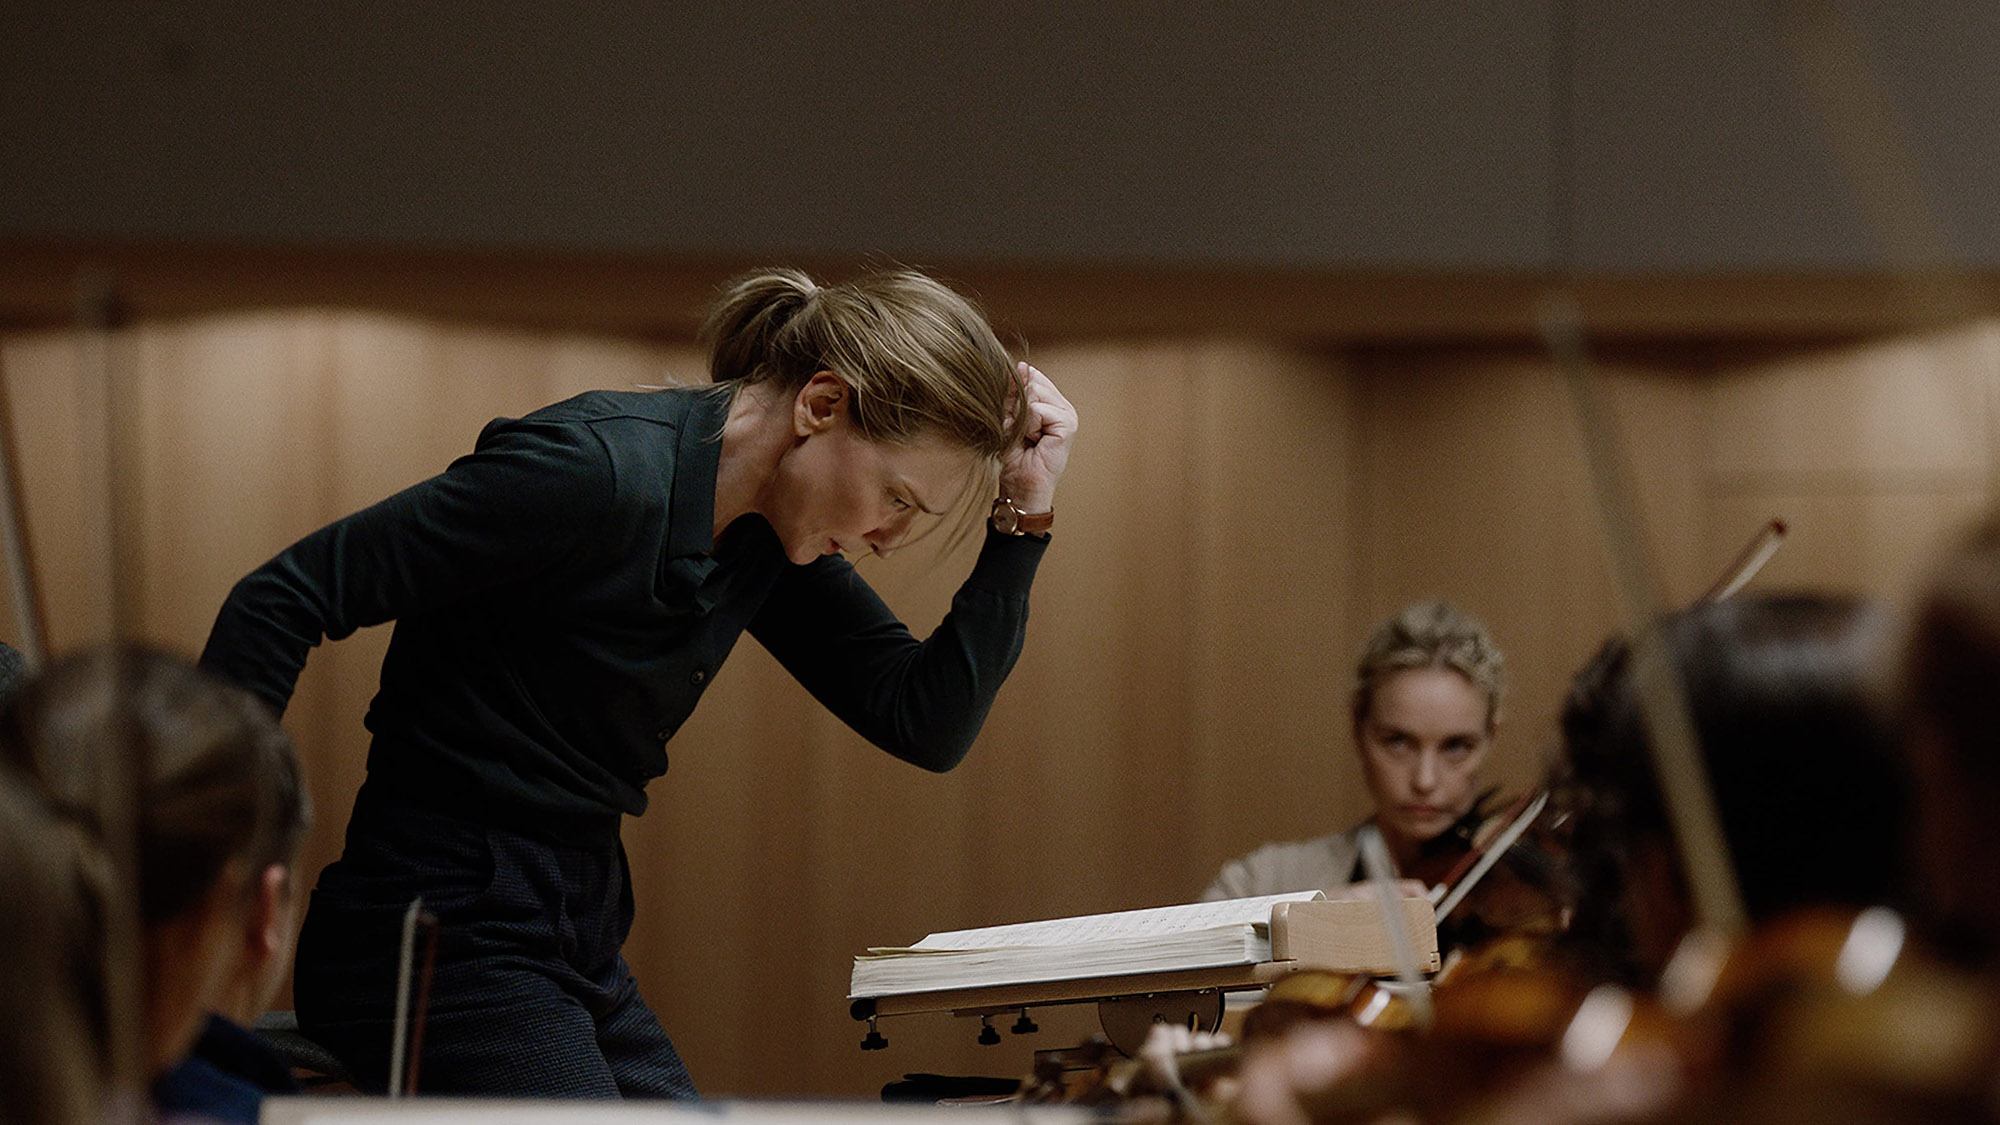 A still from the movie Tar in which the main character Tar, played by Cate Blanchett, is conducting an orchestra.